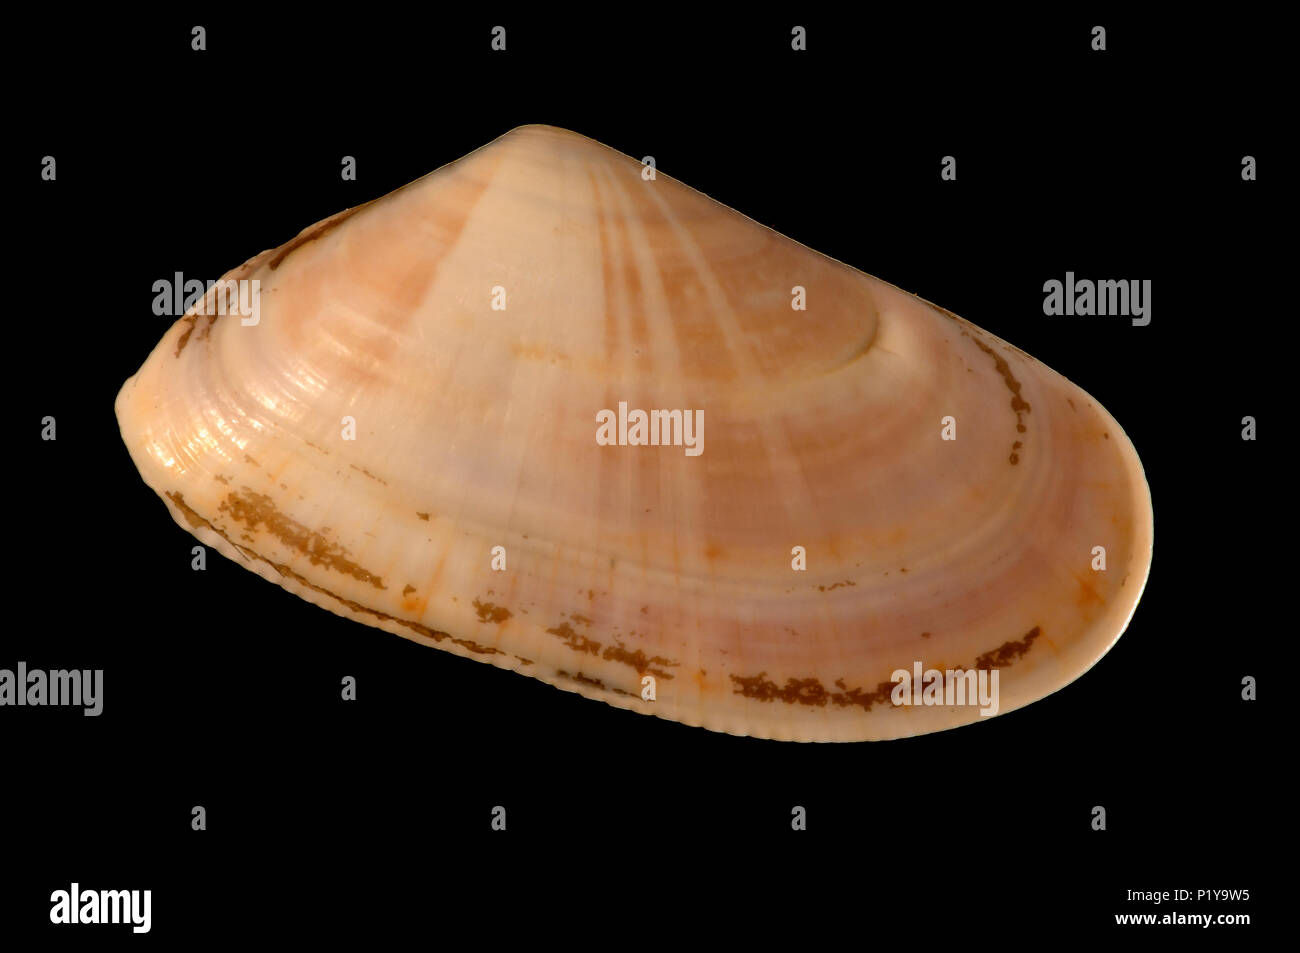 Seashell of Donax trunculus. Malacology collection. Spain. Europe Stock Photo